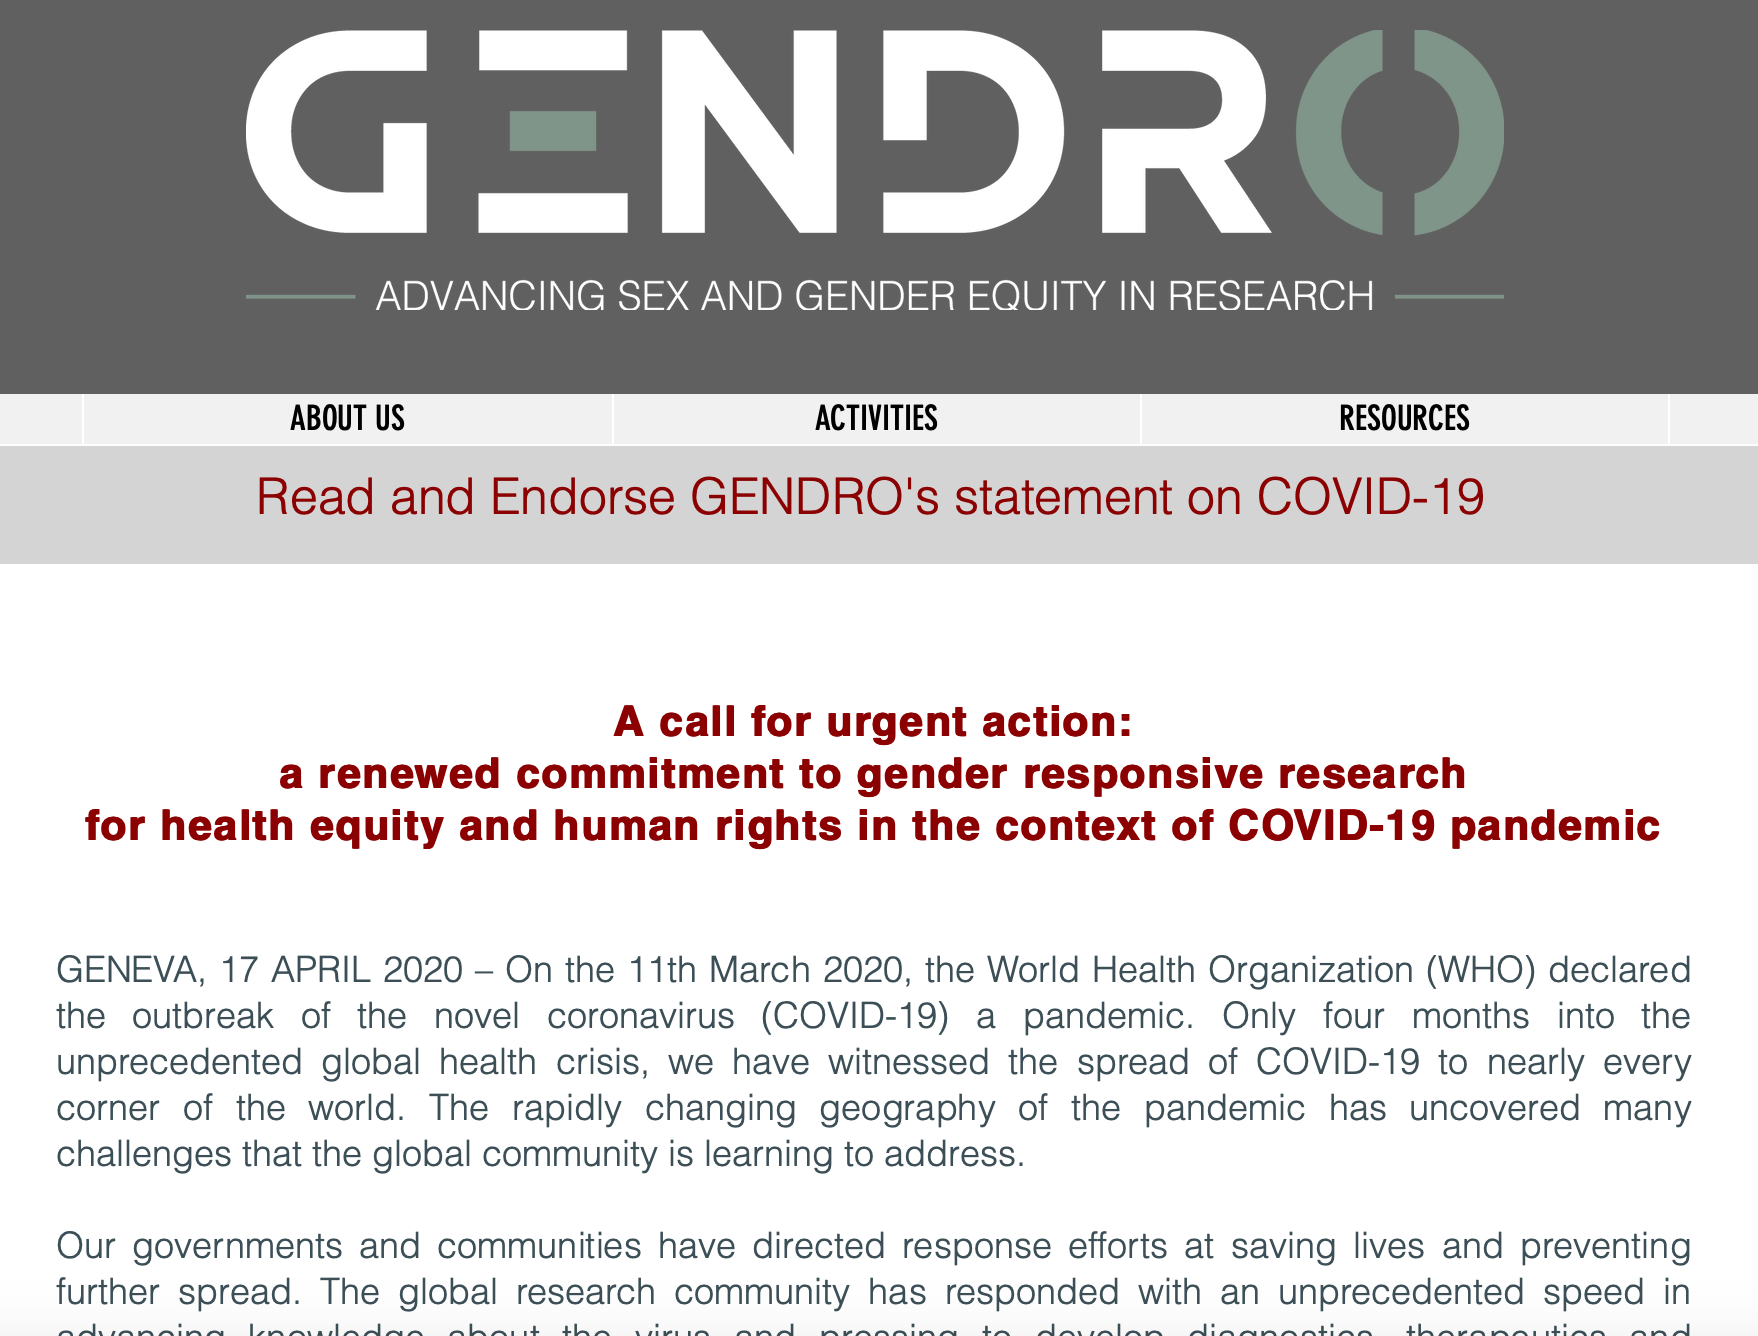 A call for urgent action: a renewed commitment to gender responsive research for health equity and human rights in the context of COVID-19 pandemic